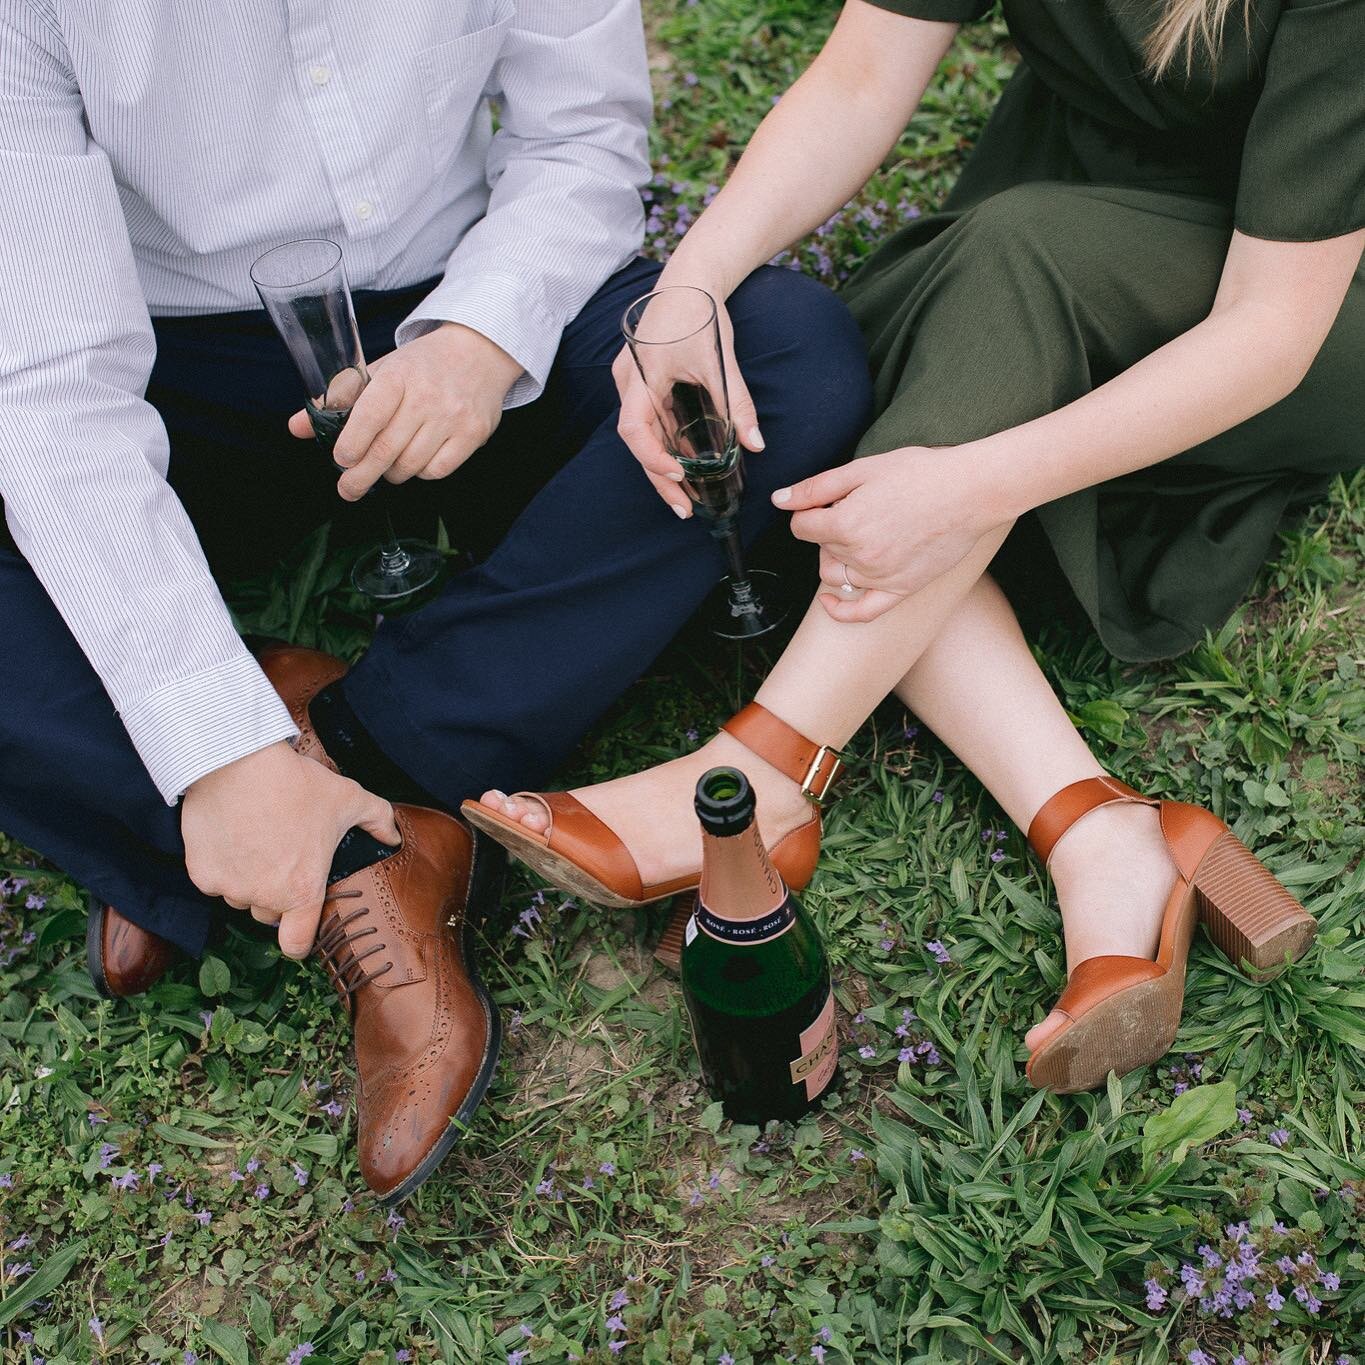 These champagne glasses came a long way to find their home with this sweet couple. Aaron&rsquo;s sister gifted these handmade glasses to them, so of course they needed to play a little role in commemorating their engagement by making an appearance in